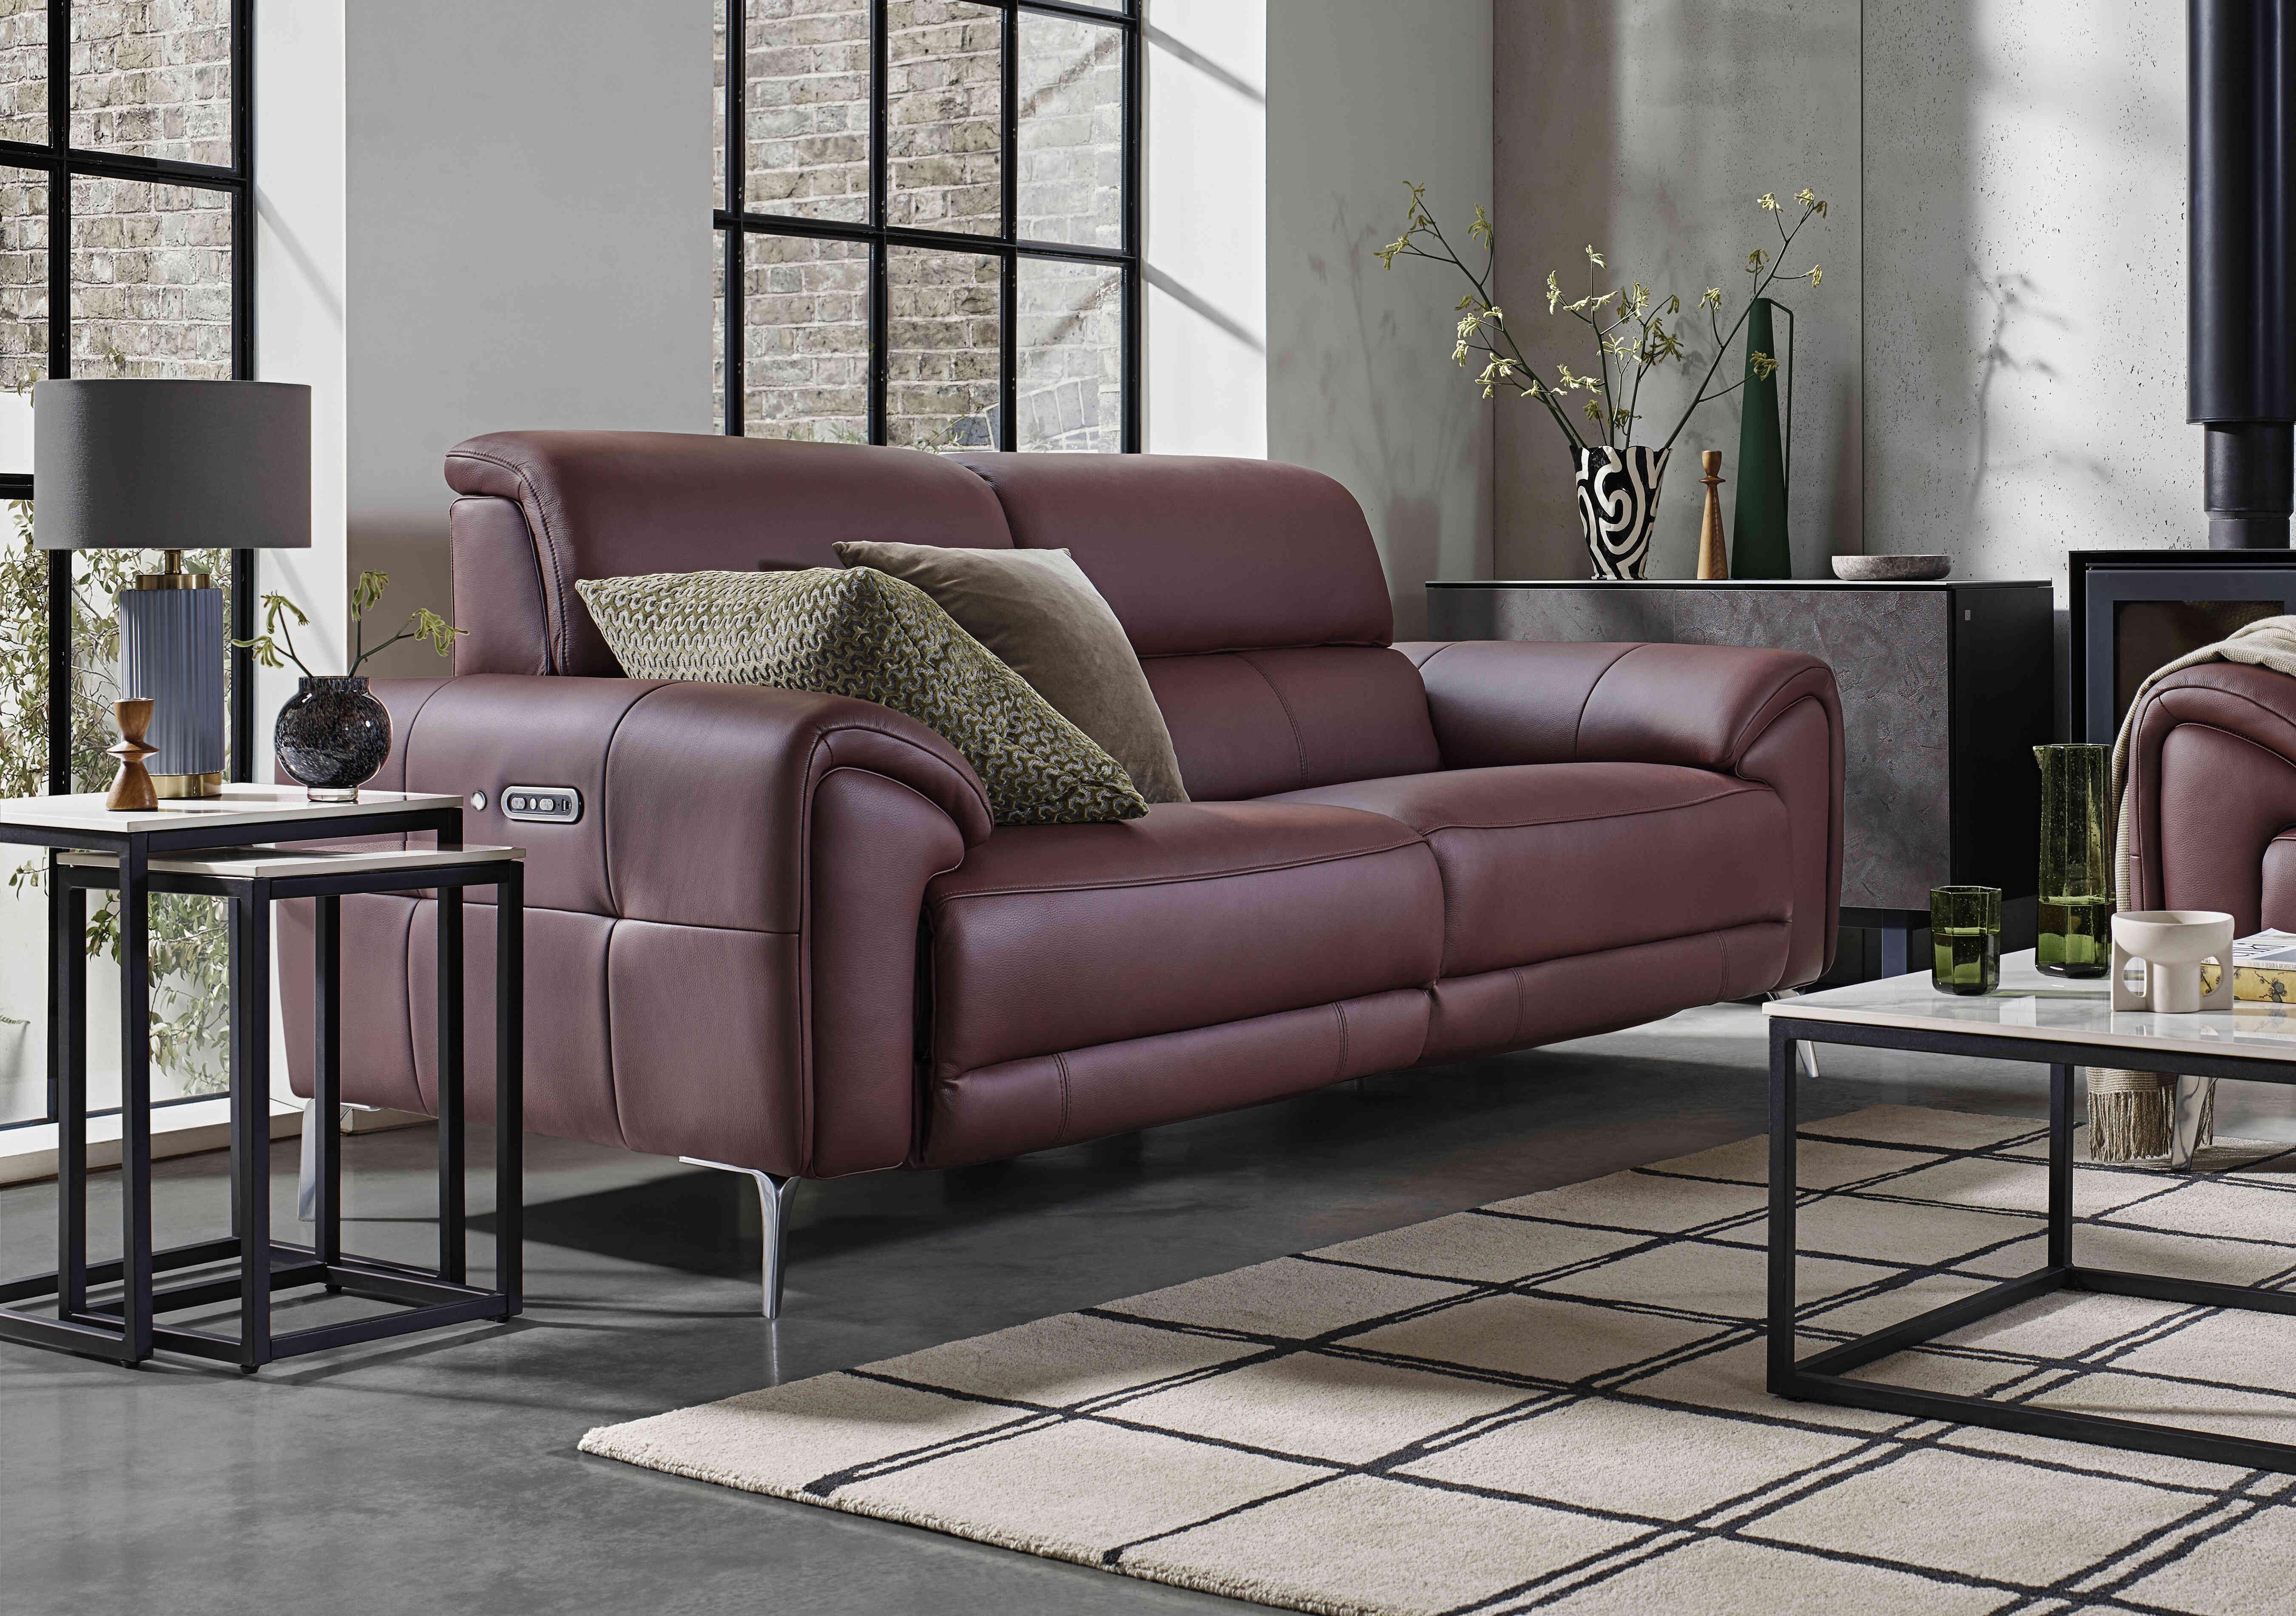 Vino Leather 3 Seater Power Recliner Sofa with Power Headrests and Heated Seats in  on Furniture Village